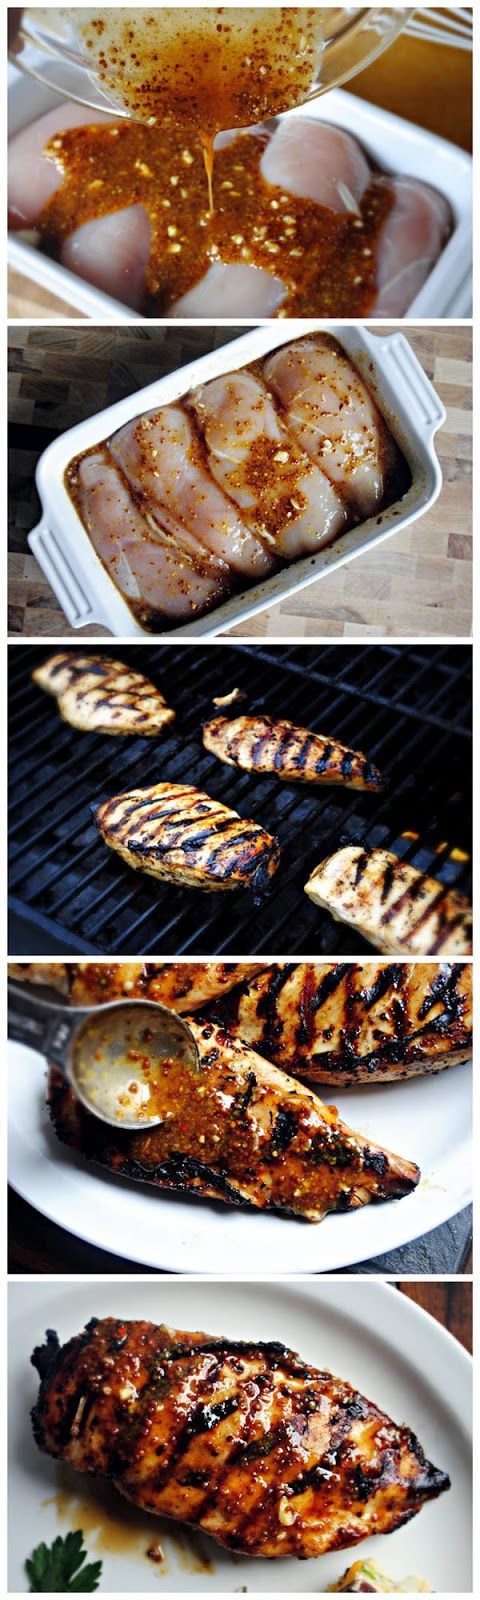 Grilled Honey Mustard Chicken || “I have made this recipe a dozen times; whether a quick marinade then on the grill, marinade for